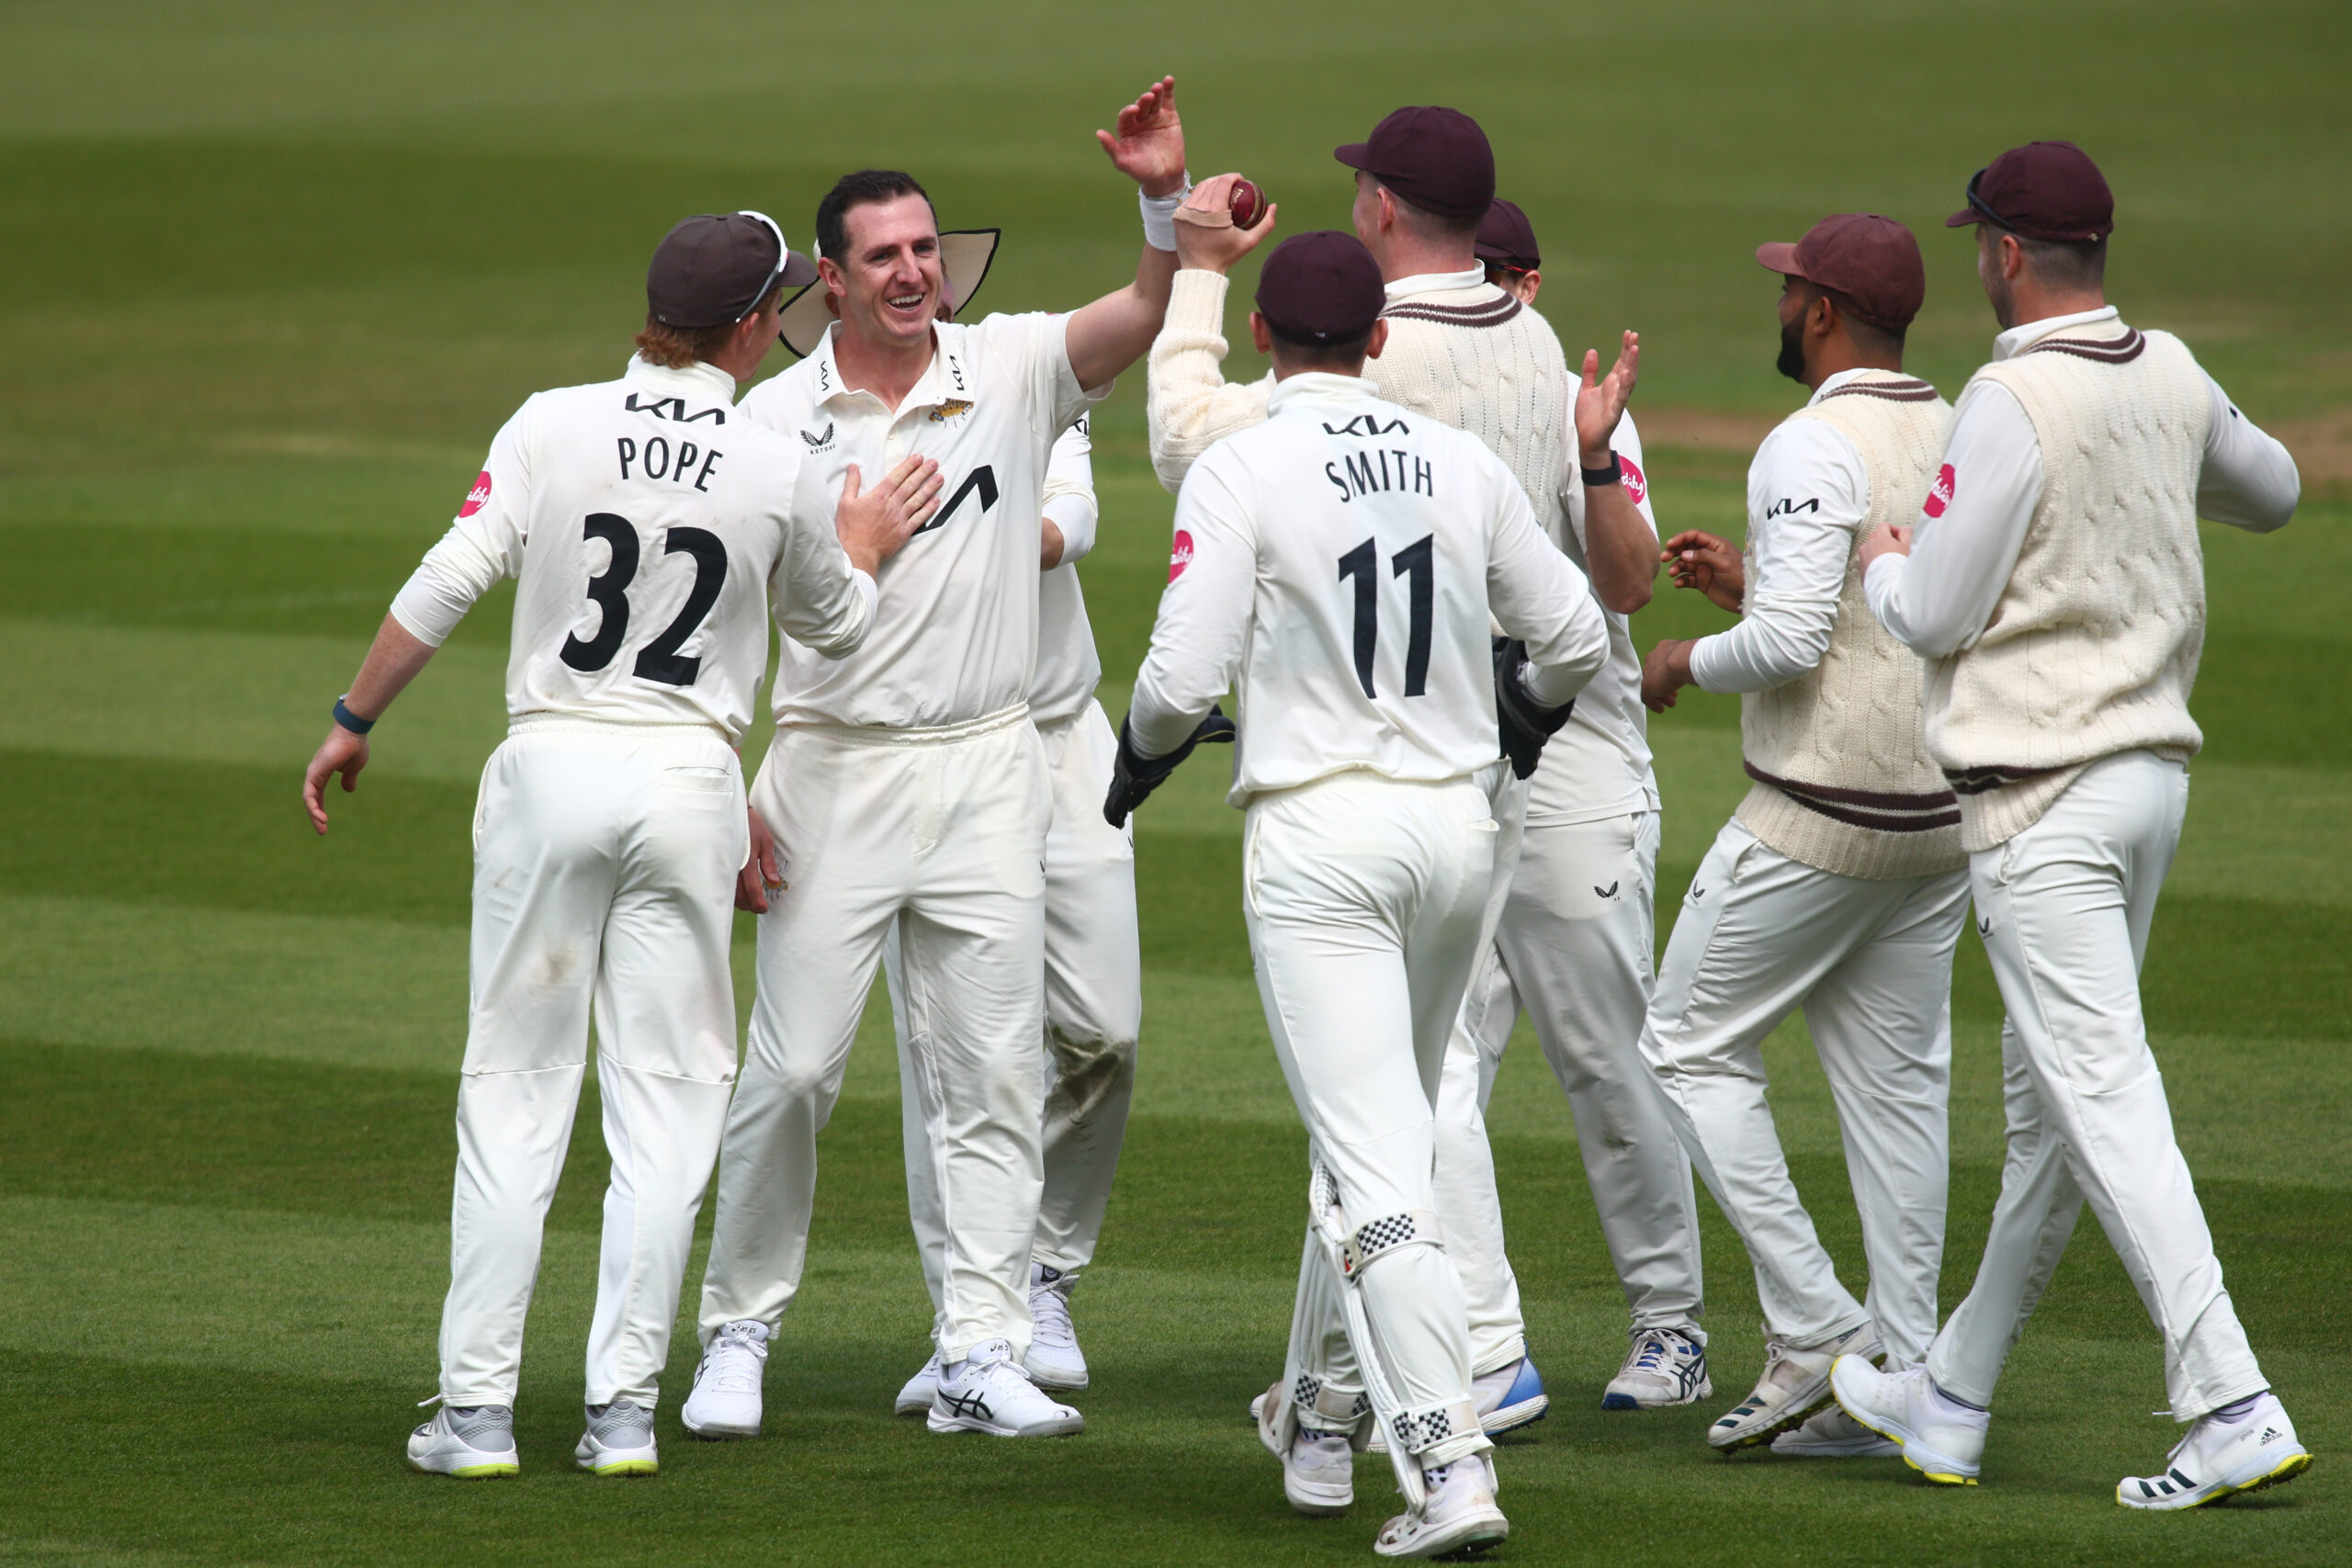 Worrall takes five as Surrey complete innings win